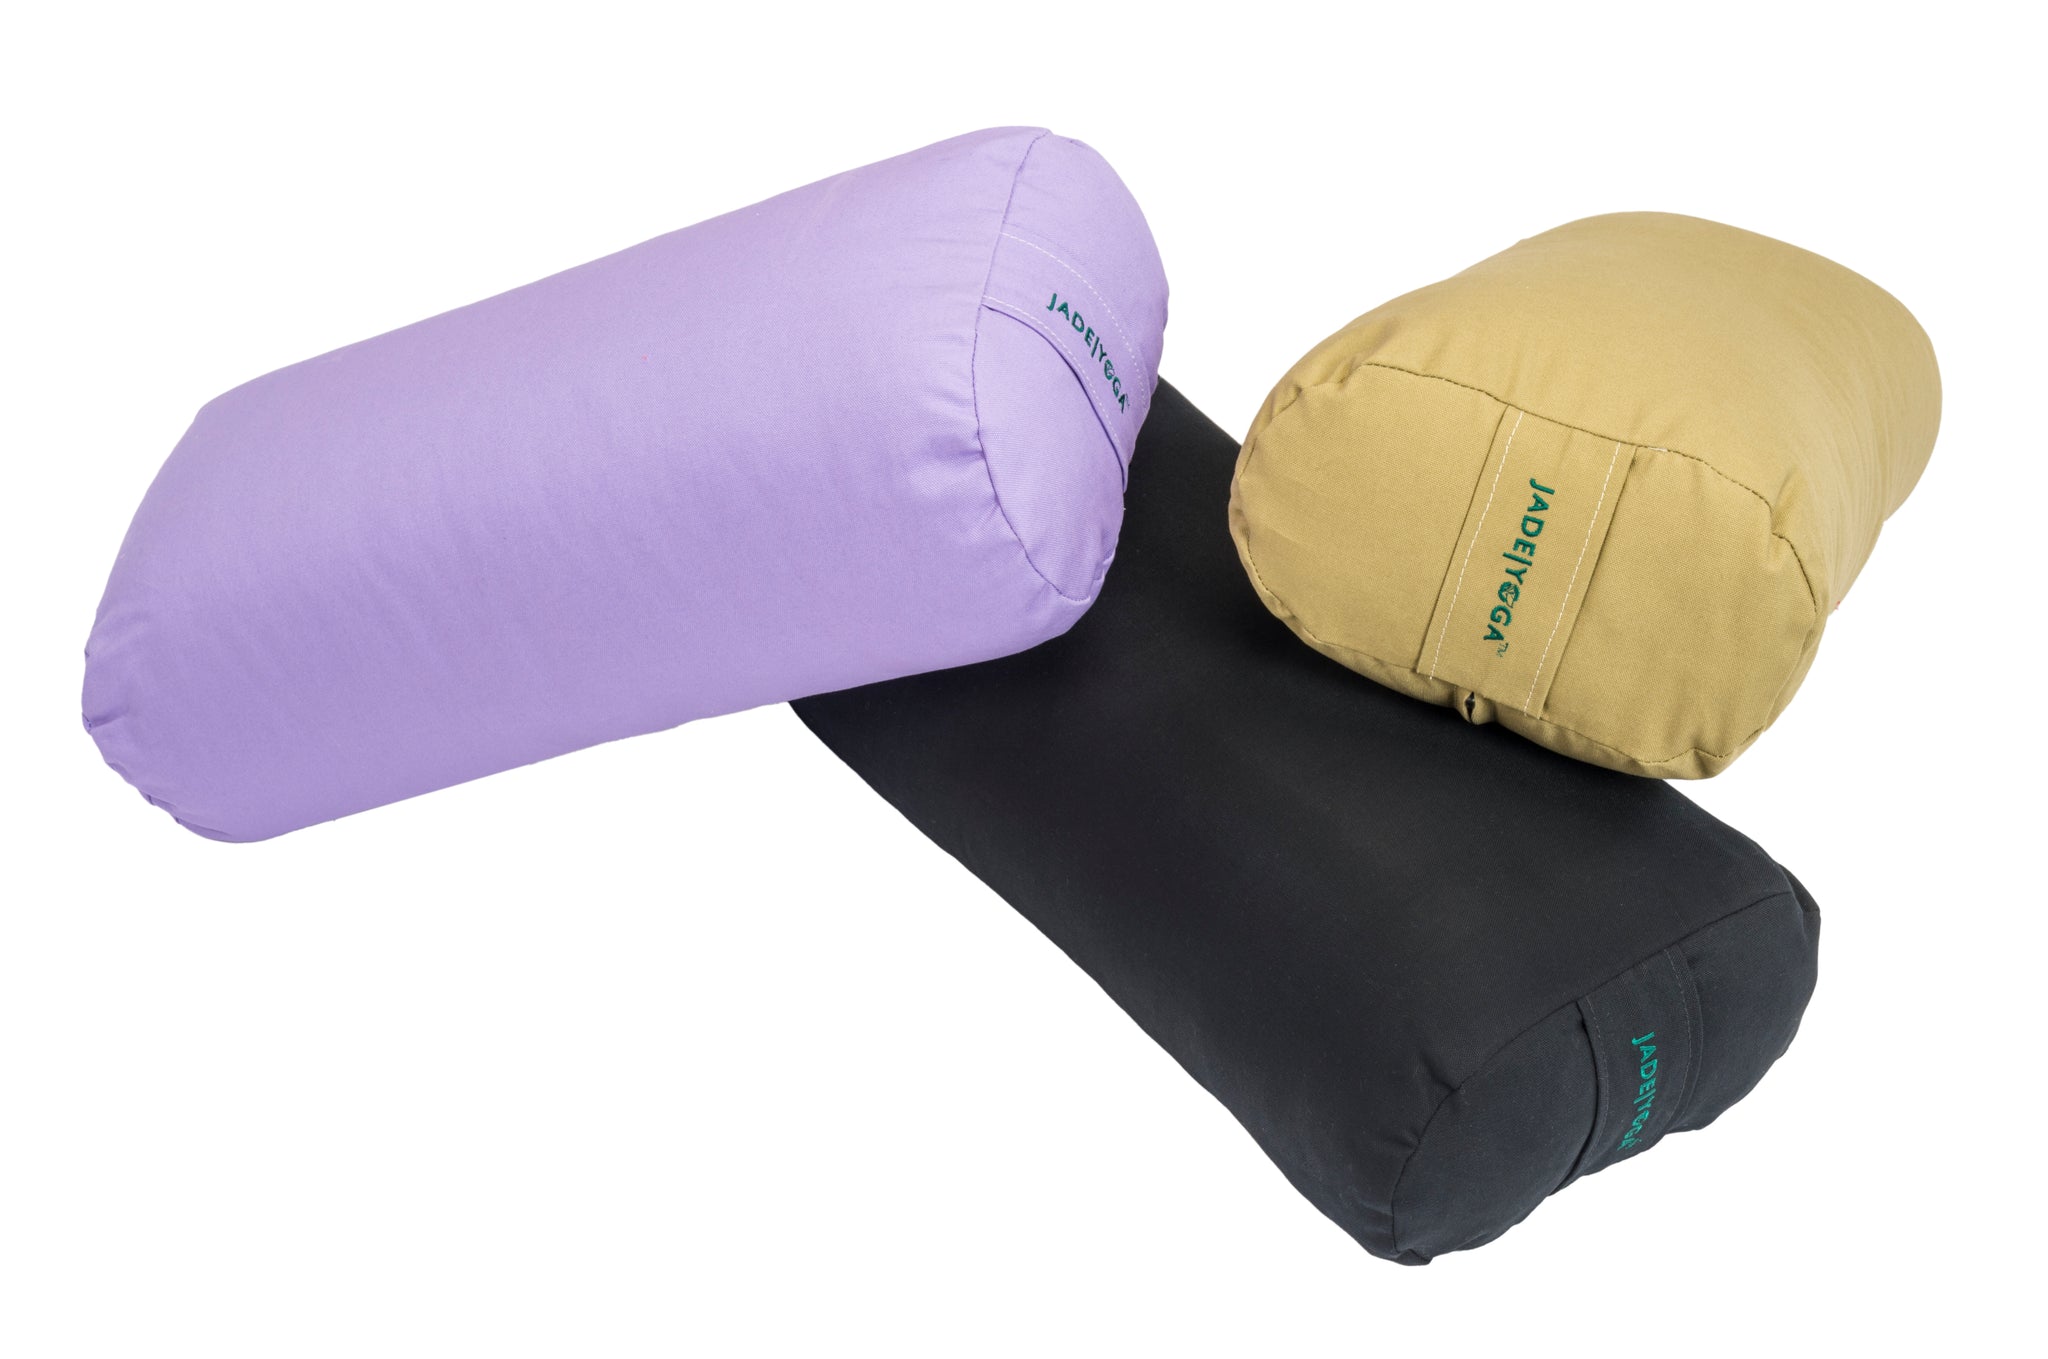 Yoga Bolster Pillows for sale in Bristol, United Kingdom, Facebook  Marketplace